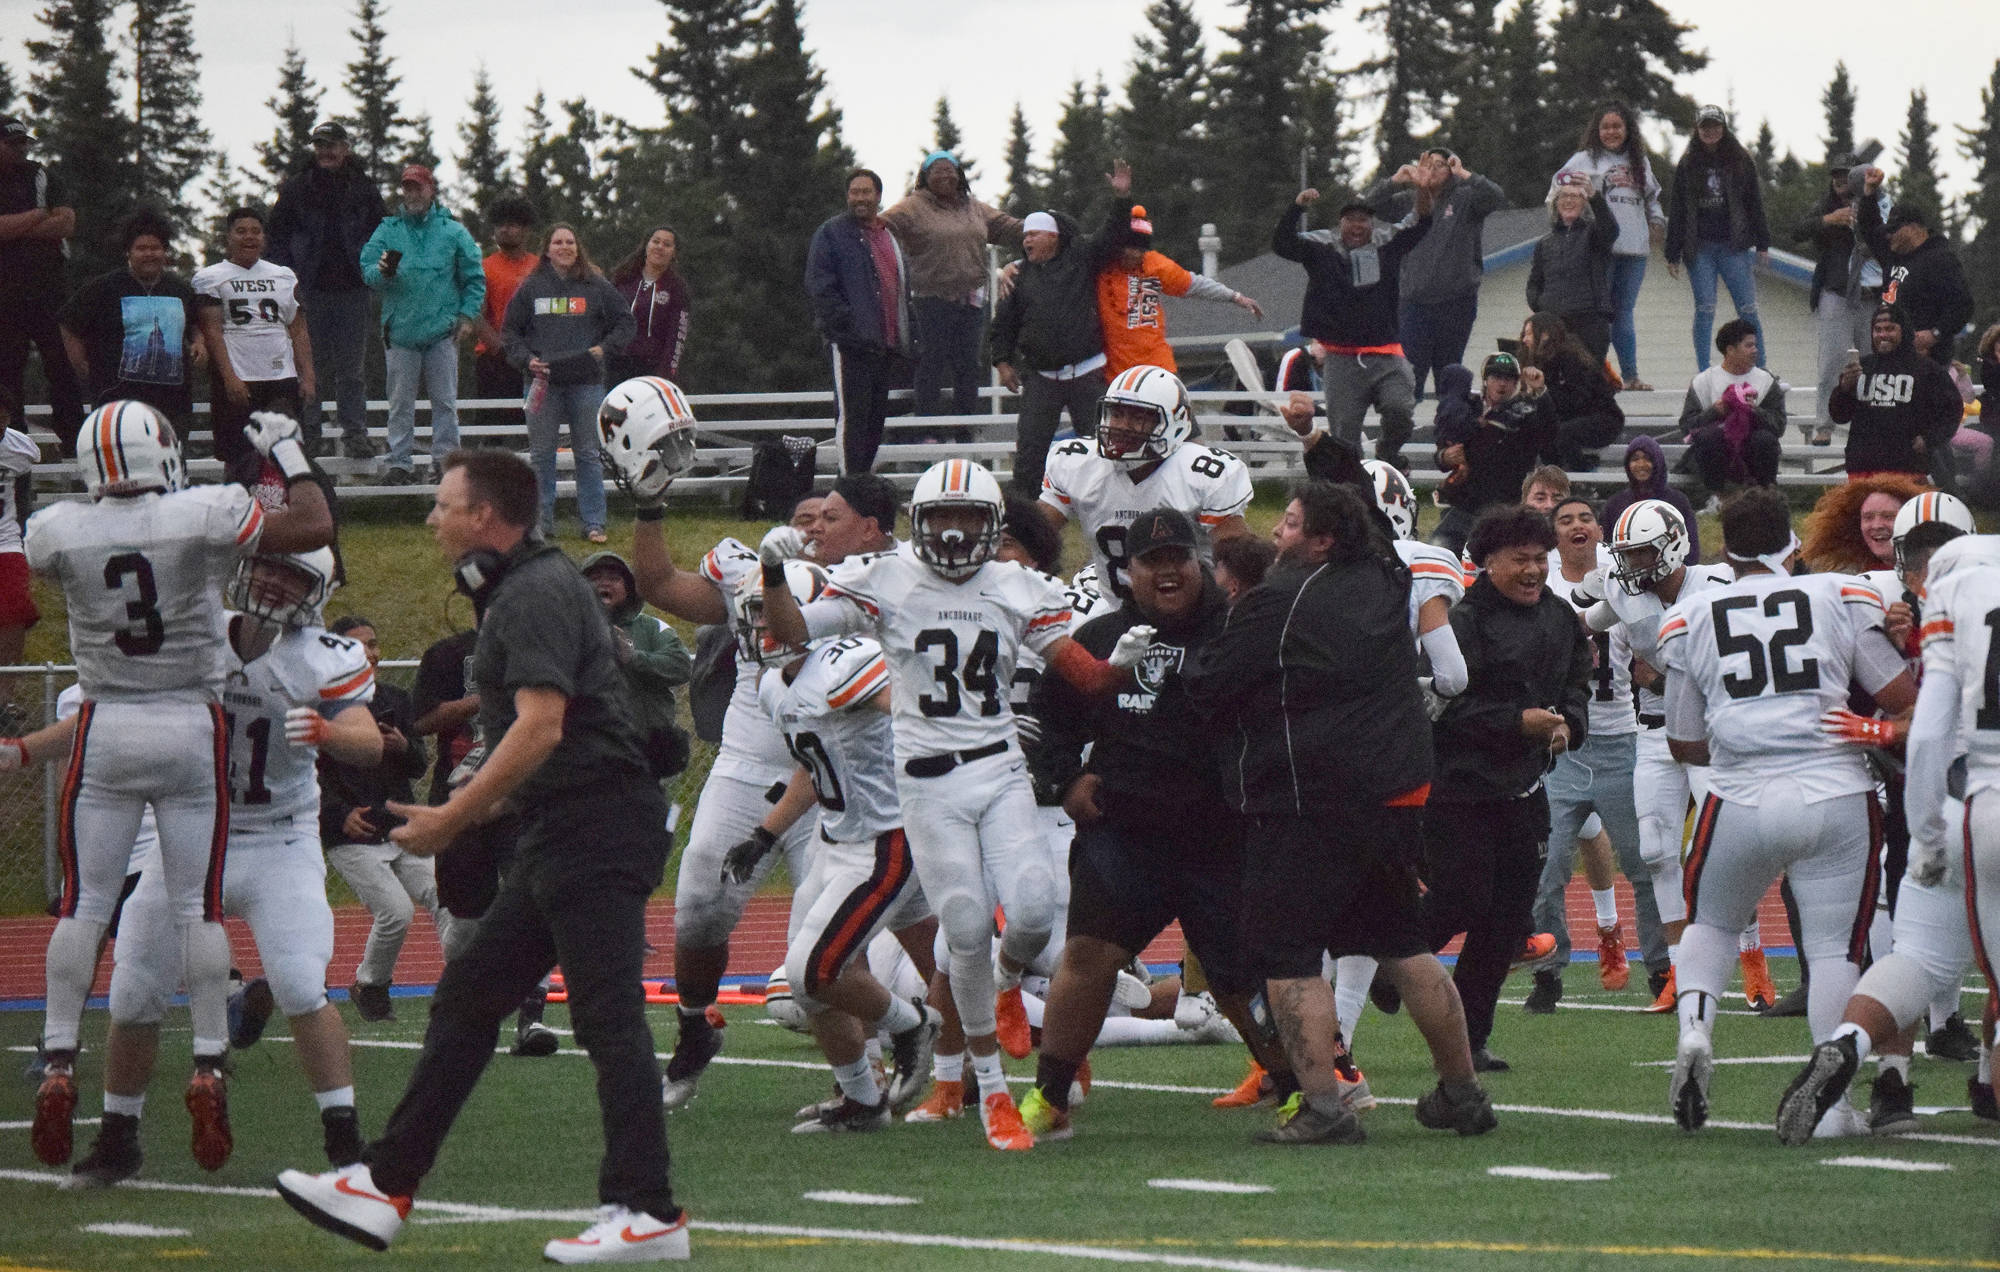 West football players and fans celebrate on field after defeating Soldotna 18-13 Friday at Justin Maile Field in Soldotna. (Photo by Joey Klecka/Peninsula Clarion)